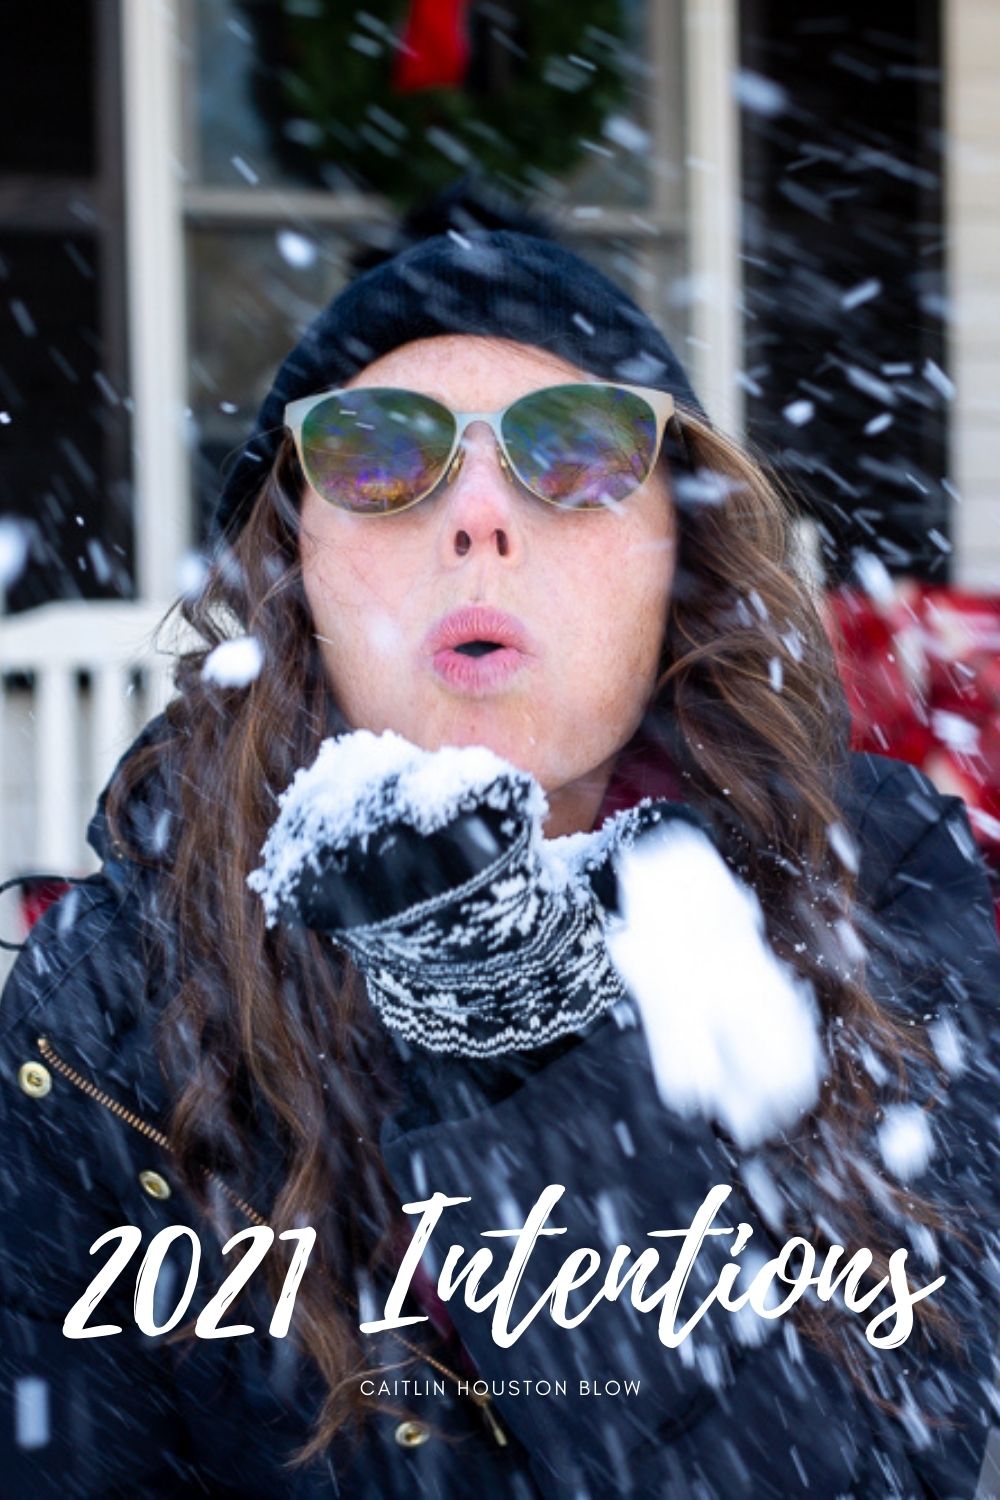 woman blowing snow at camera setting 2021 intentions